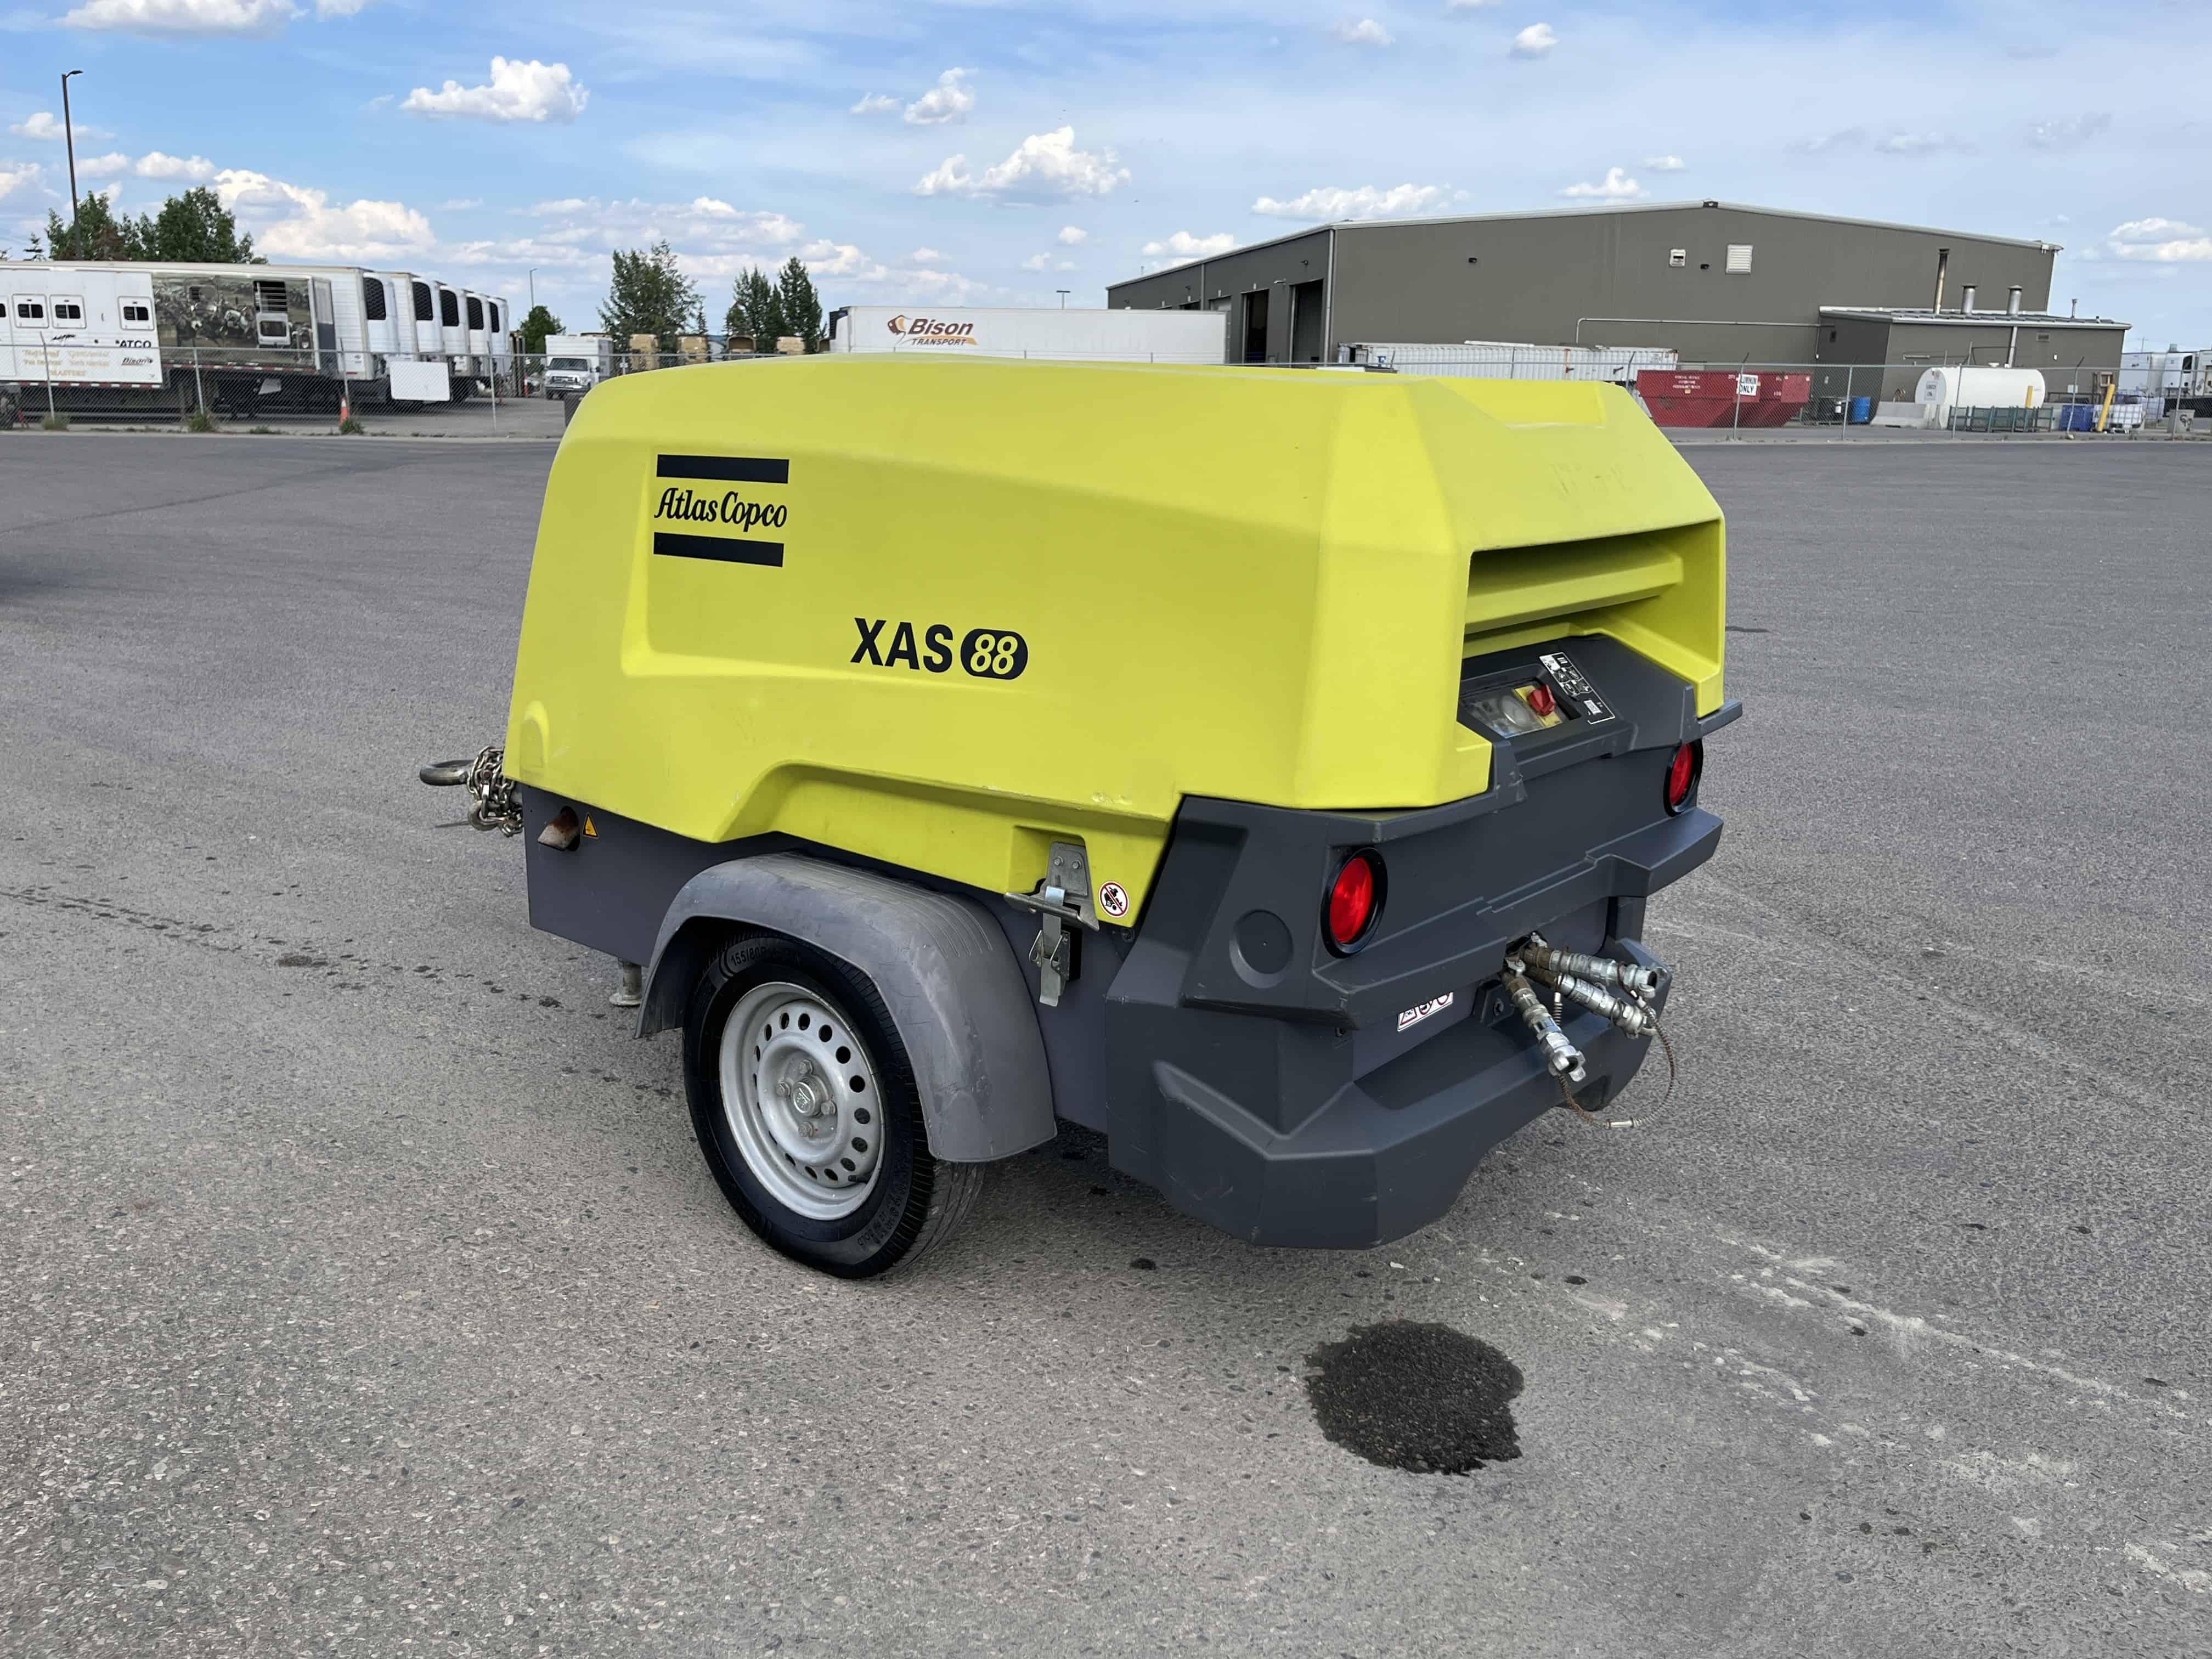 175 cfm air compressor for sale Atlas Copco XAS 88 in Ottawa, ON & Montreal Quebec